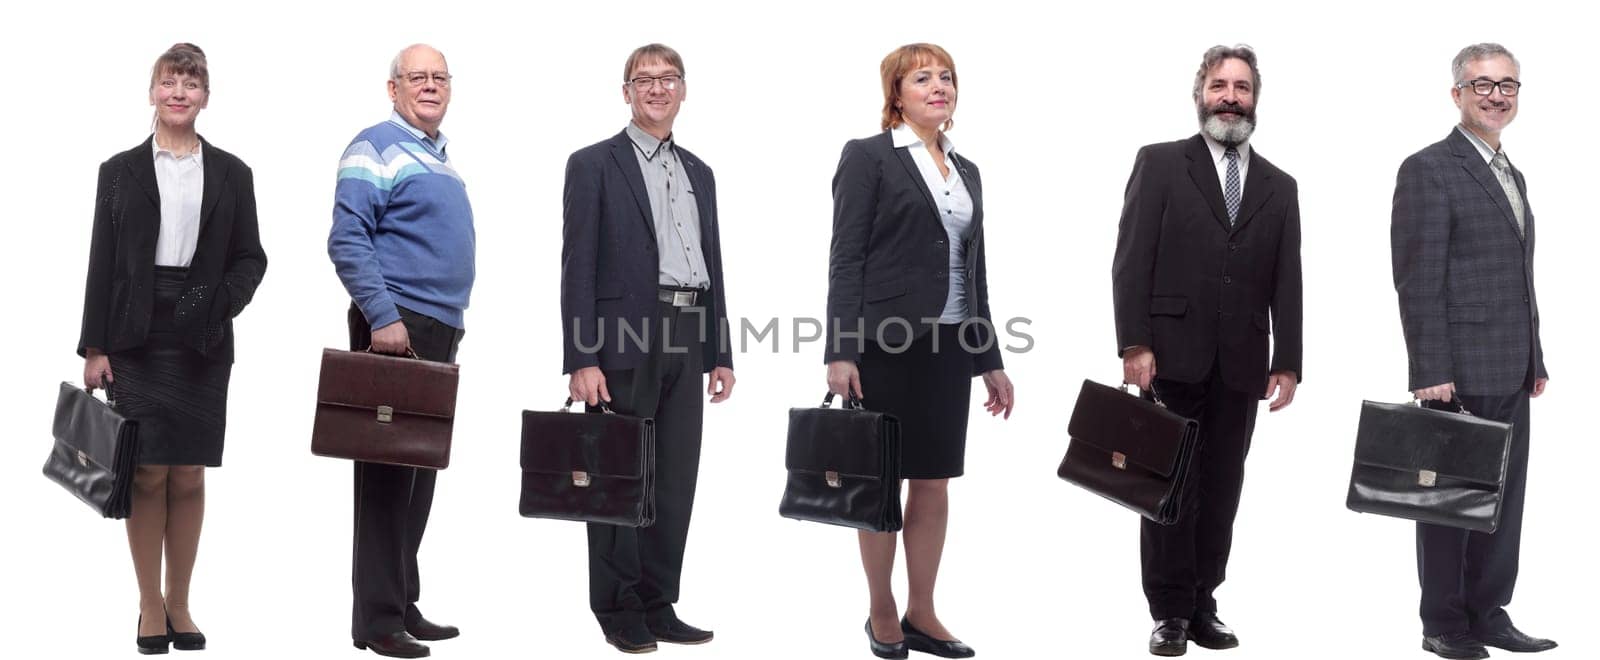 collage, group of businessmen with briefcase isolated on white background